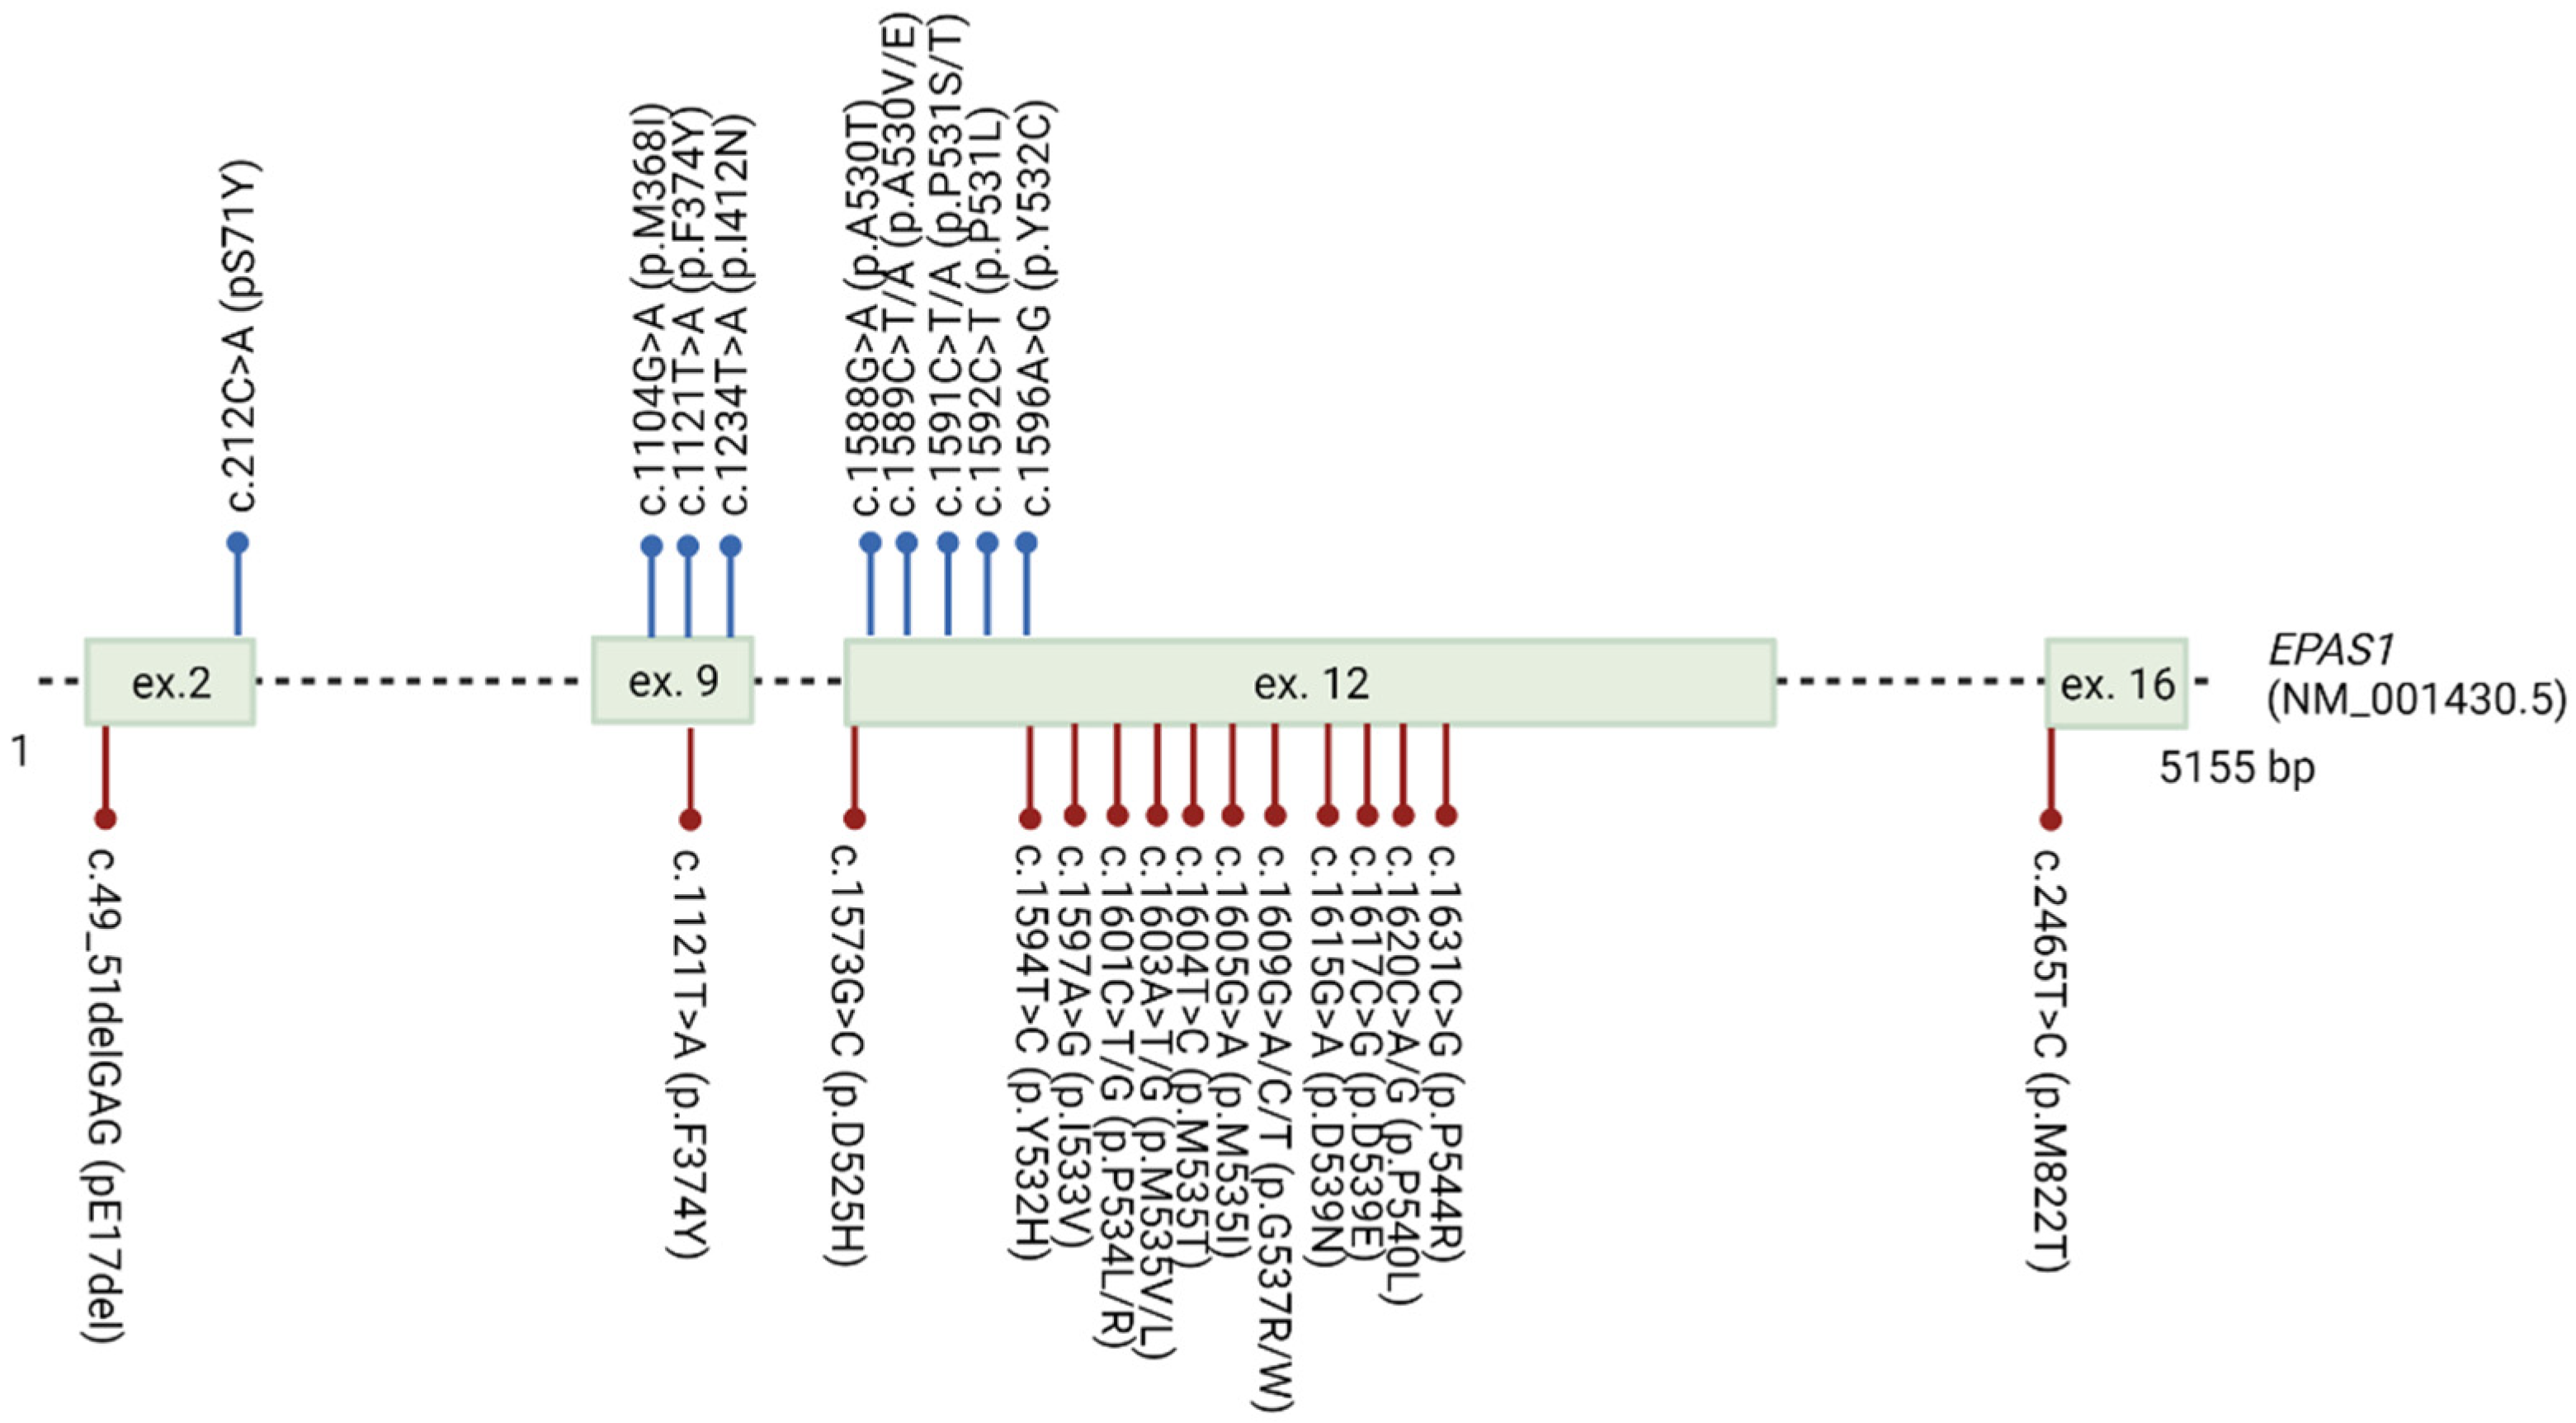 Genes Free Full Text Integration And Visualization Of Regulatory Elements And Variations Of The Epas1 Gene In Human Html